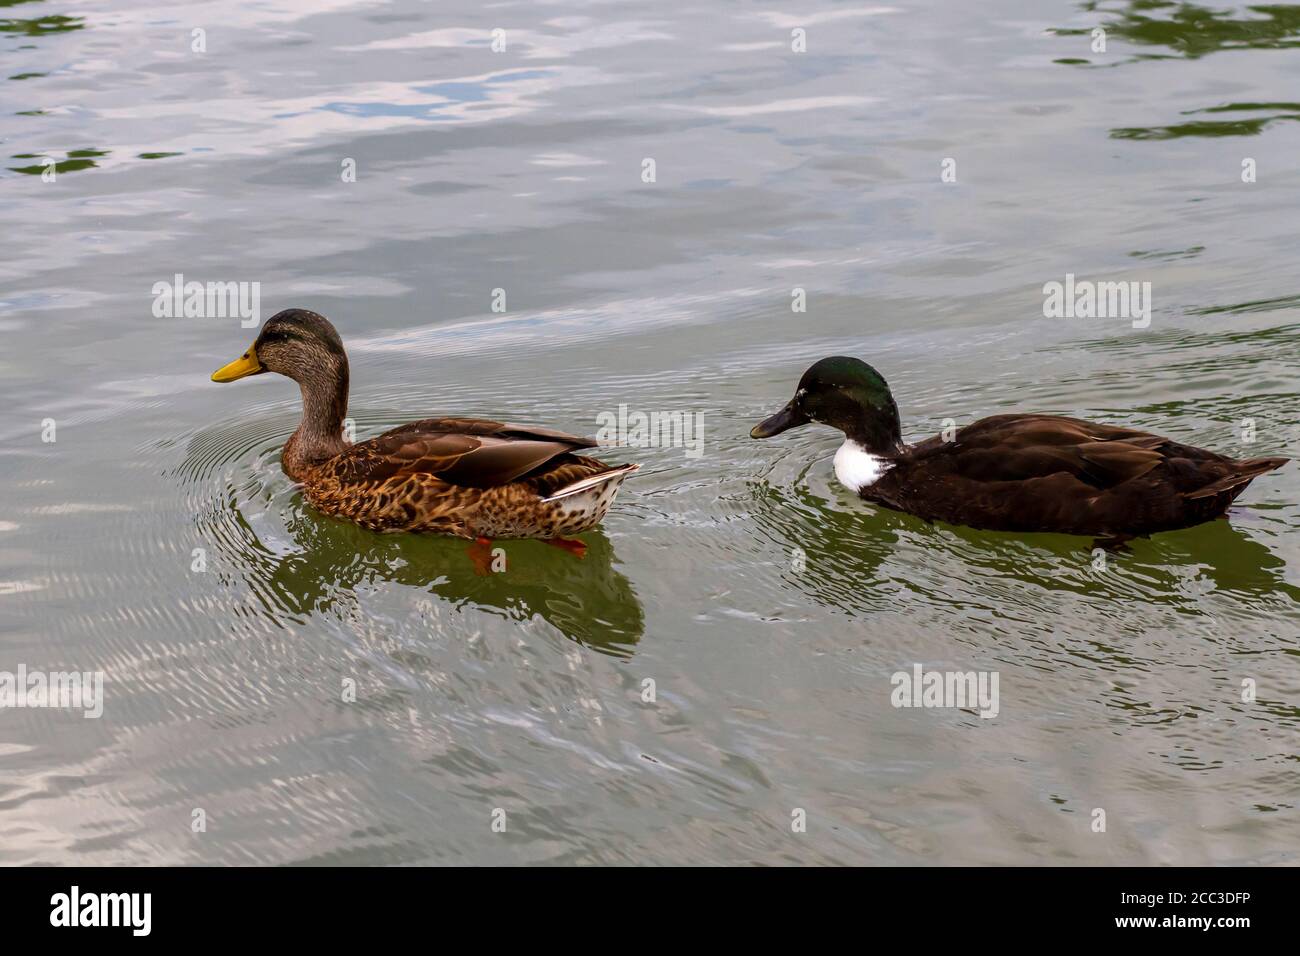 Close up isolated image of two dabbling ducks: A female mallard in the front and a male crossbreed of mallard and muscovy ducks. They swim together in Stock Photo